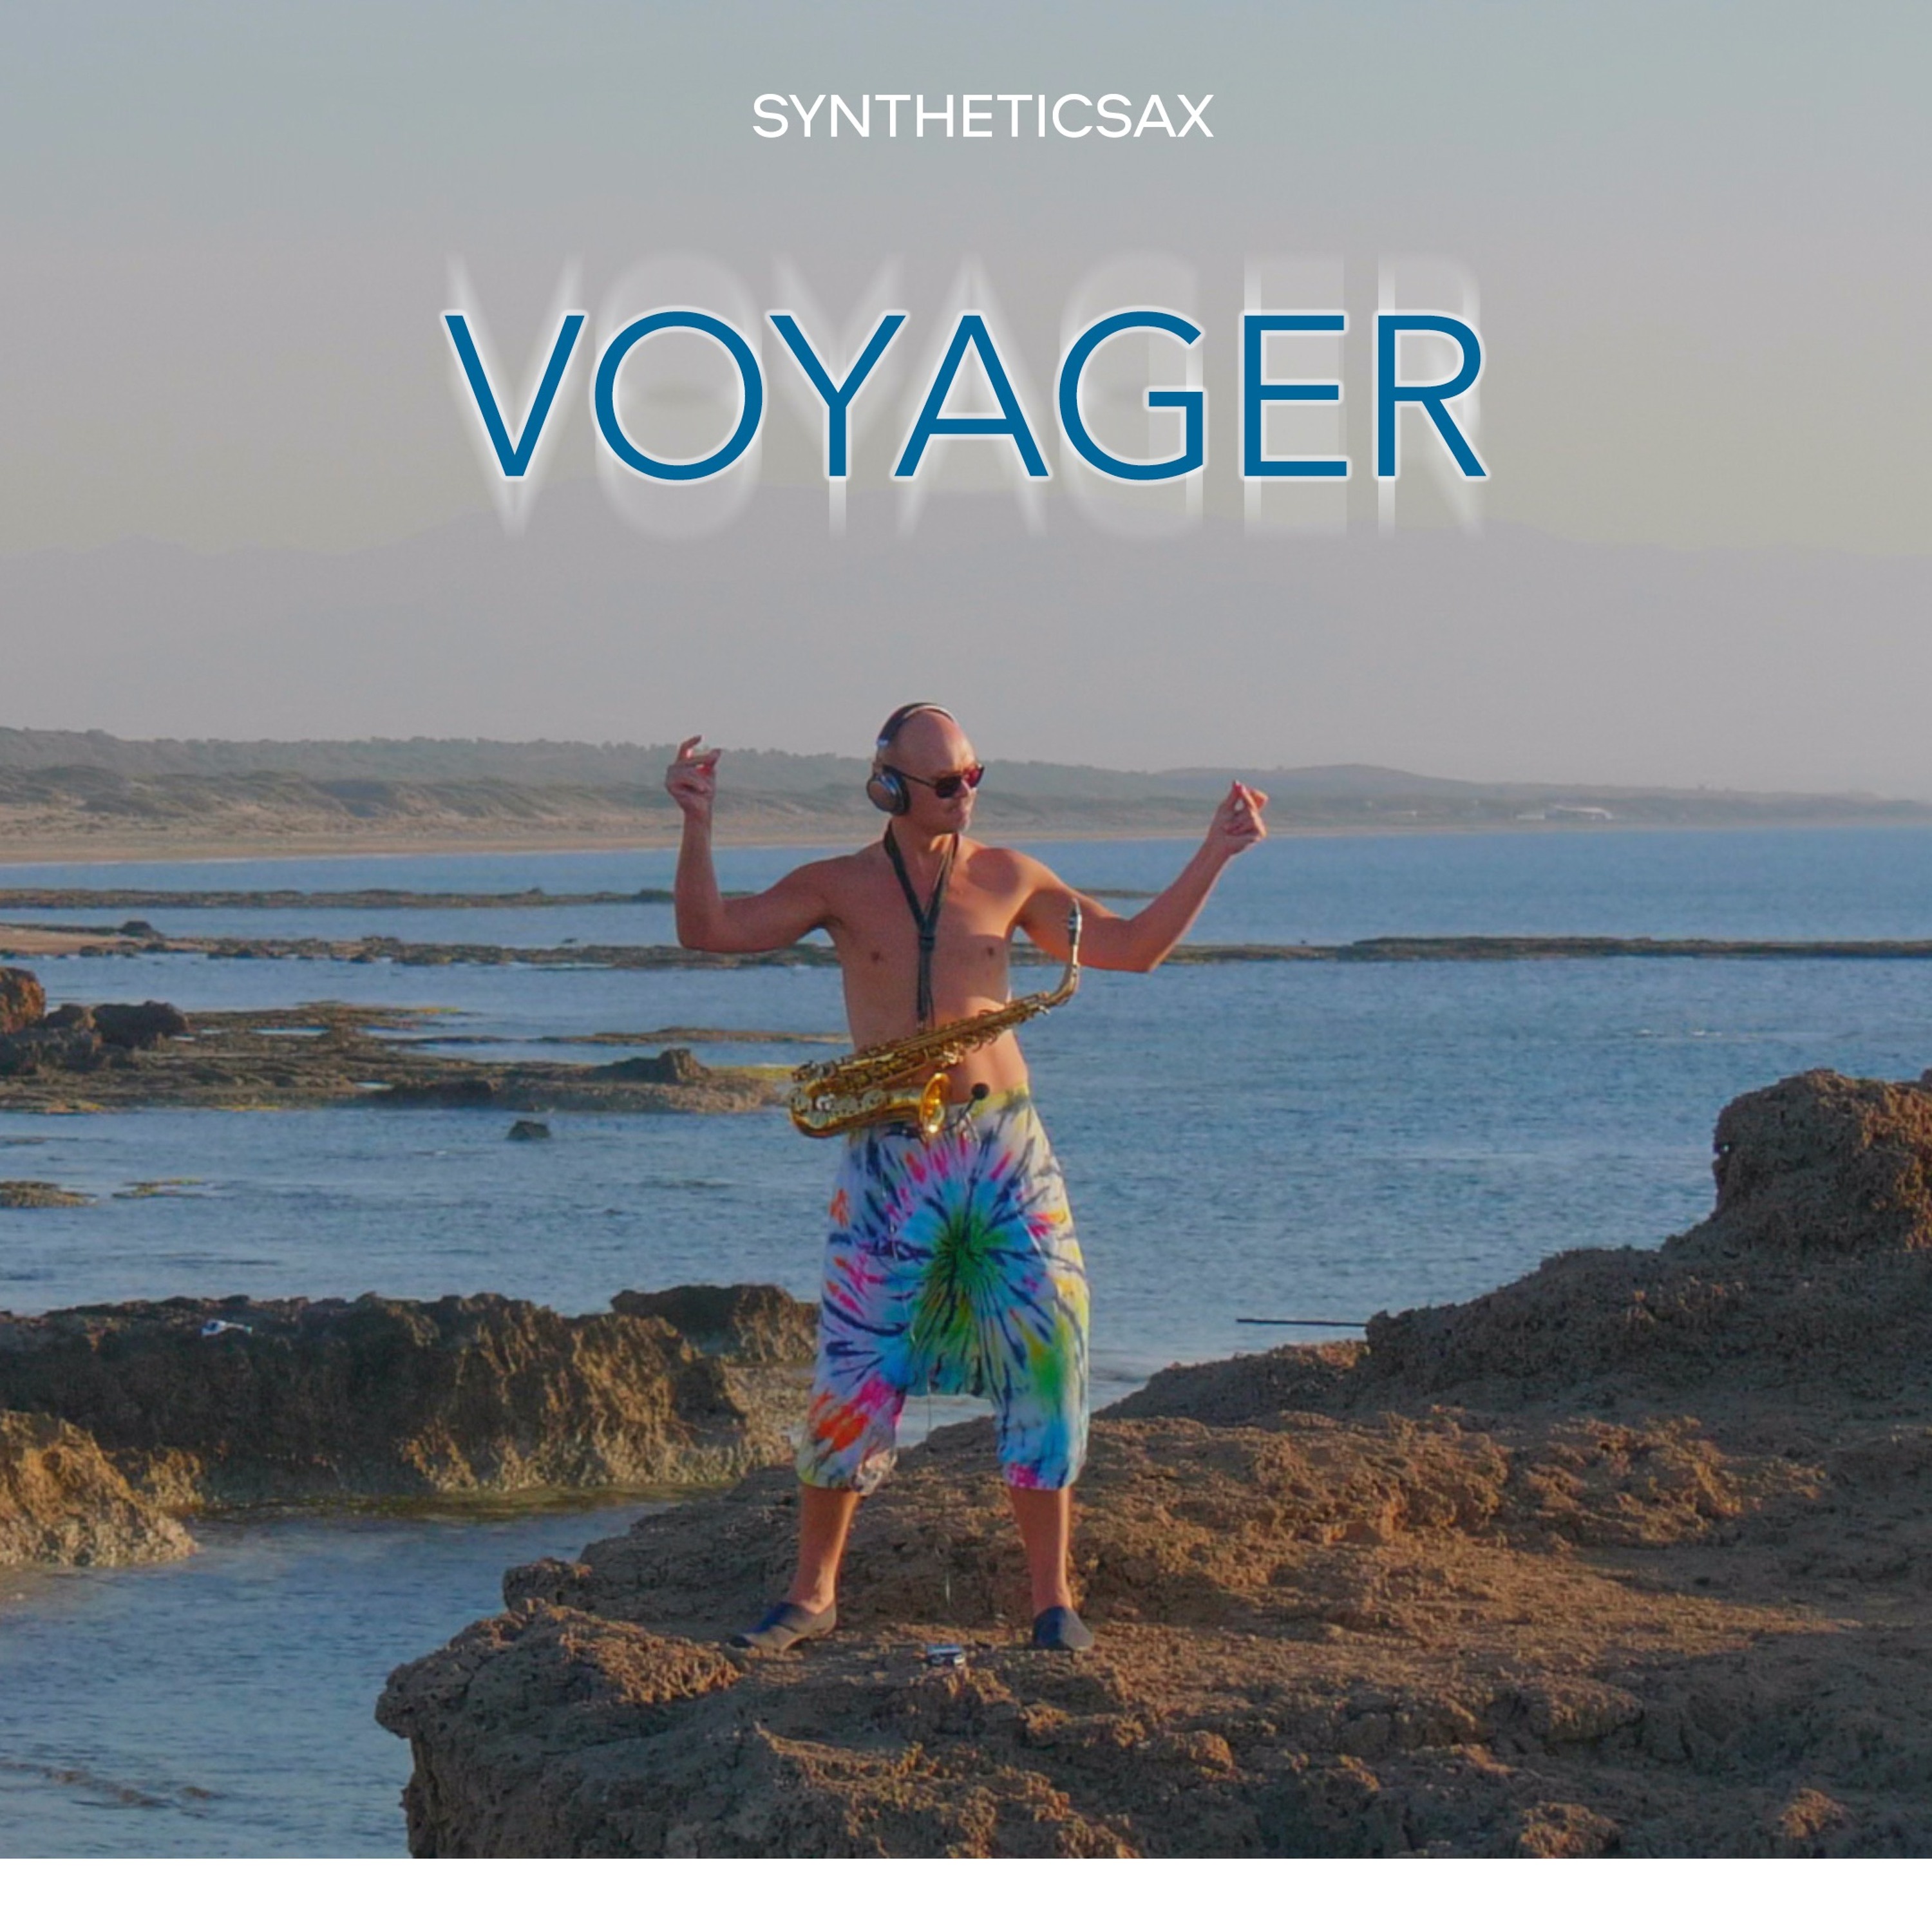 Syntheticsax - Voyager (Backing Track) – Syntheticsax – Podcast – Podtail